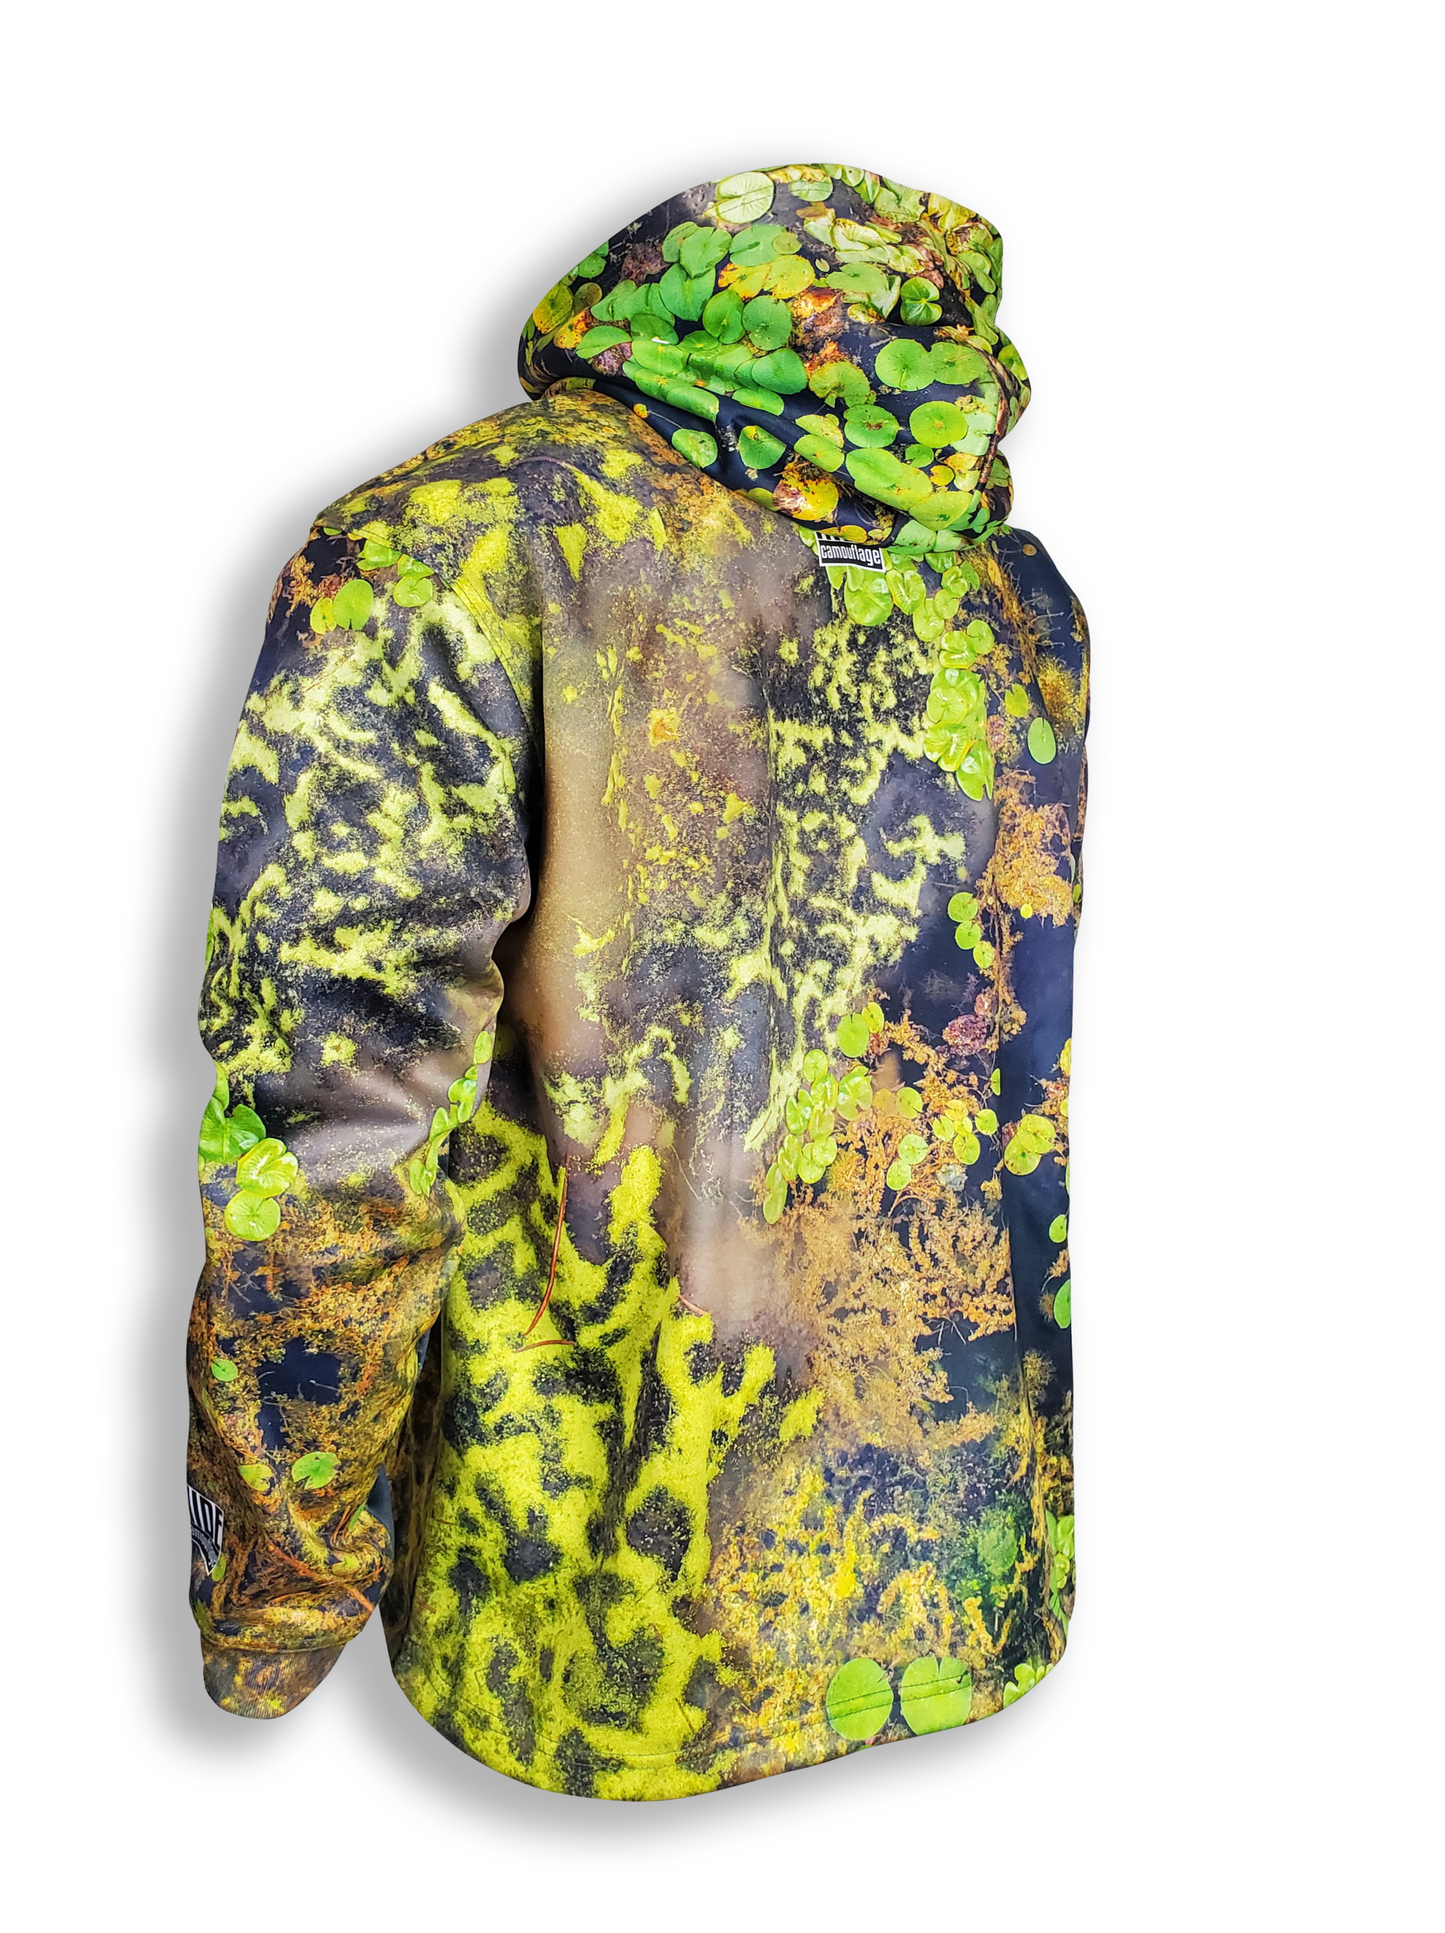 LIFESTYLE Fishing Apparel - Slop Camo - Hoodie